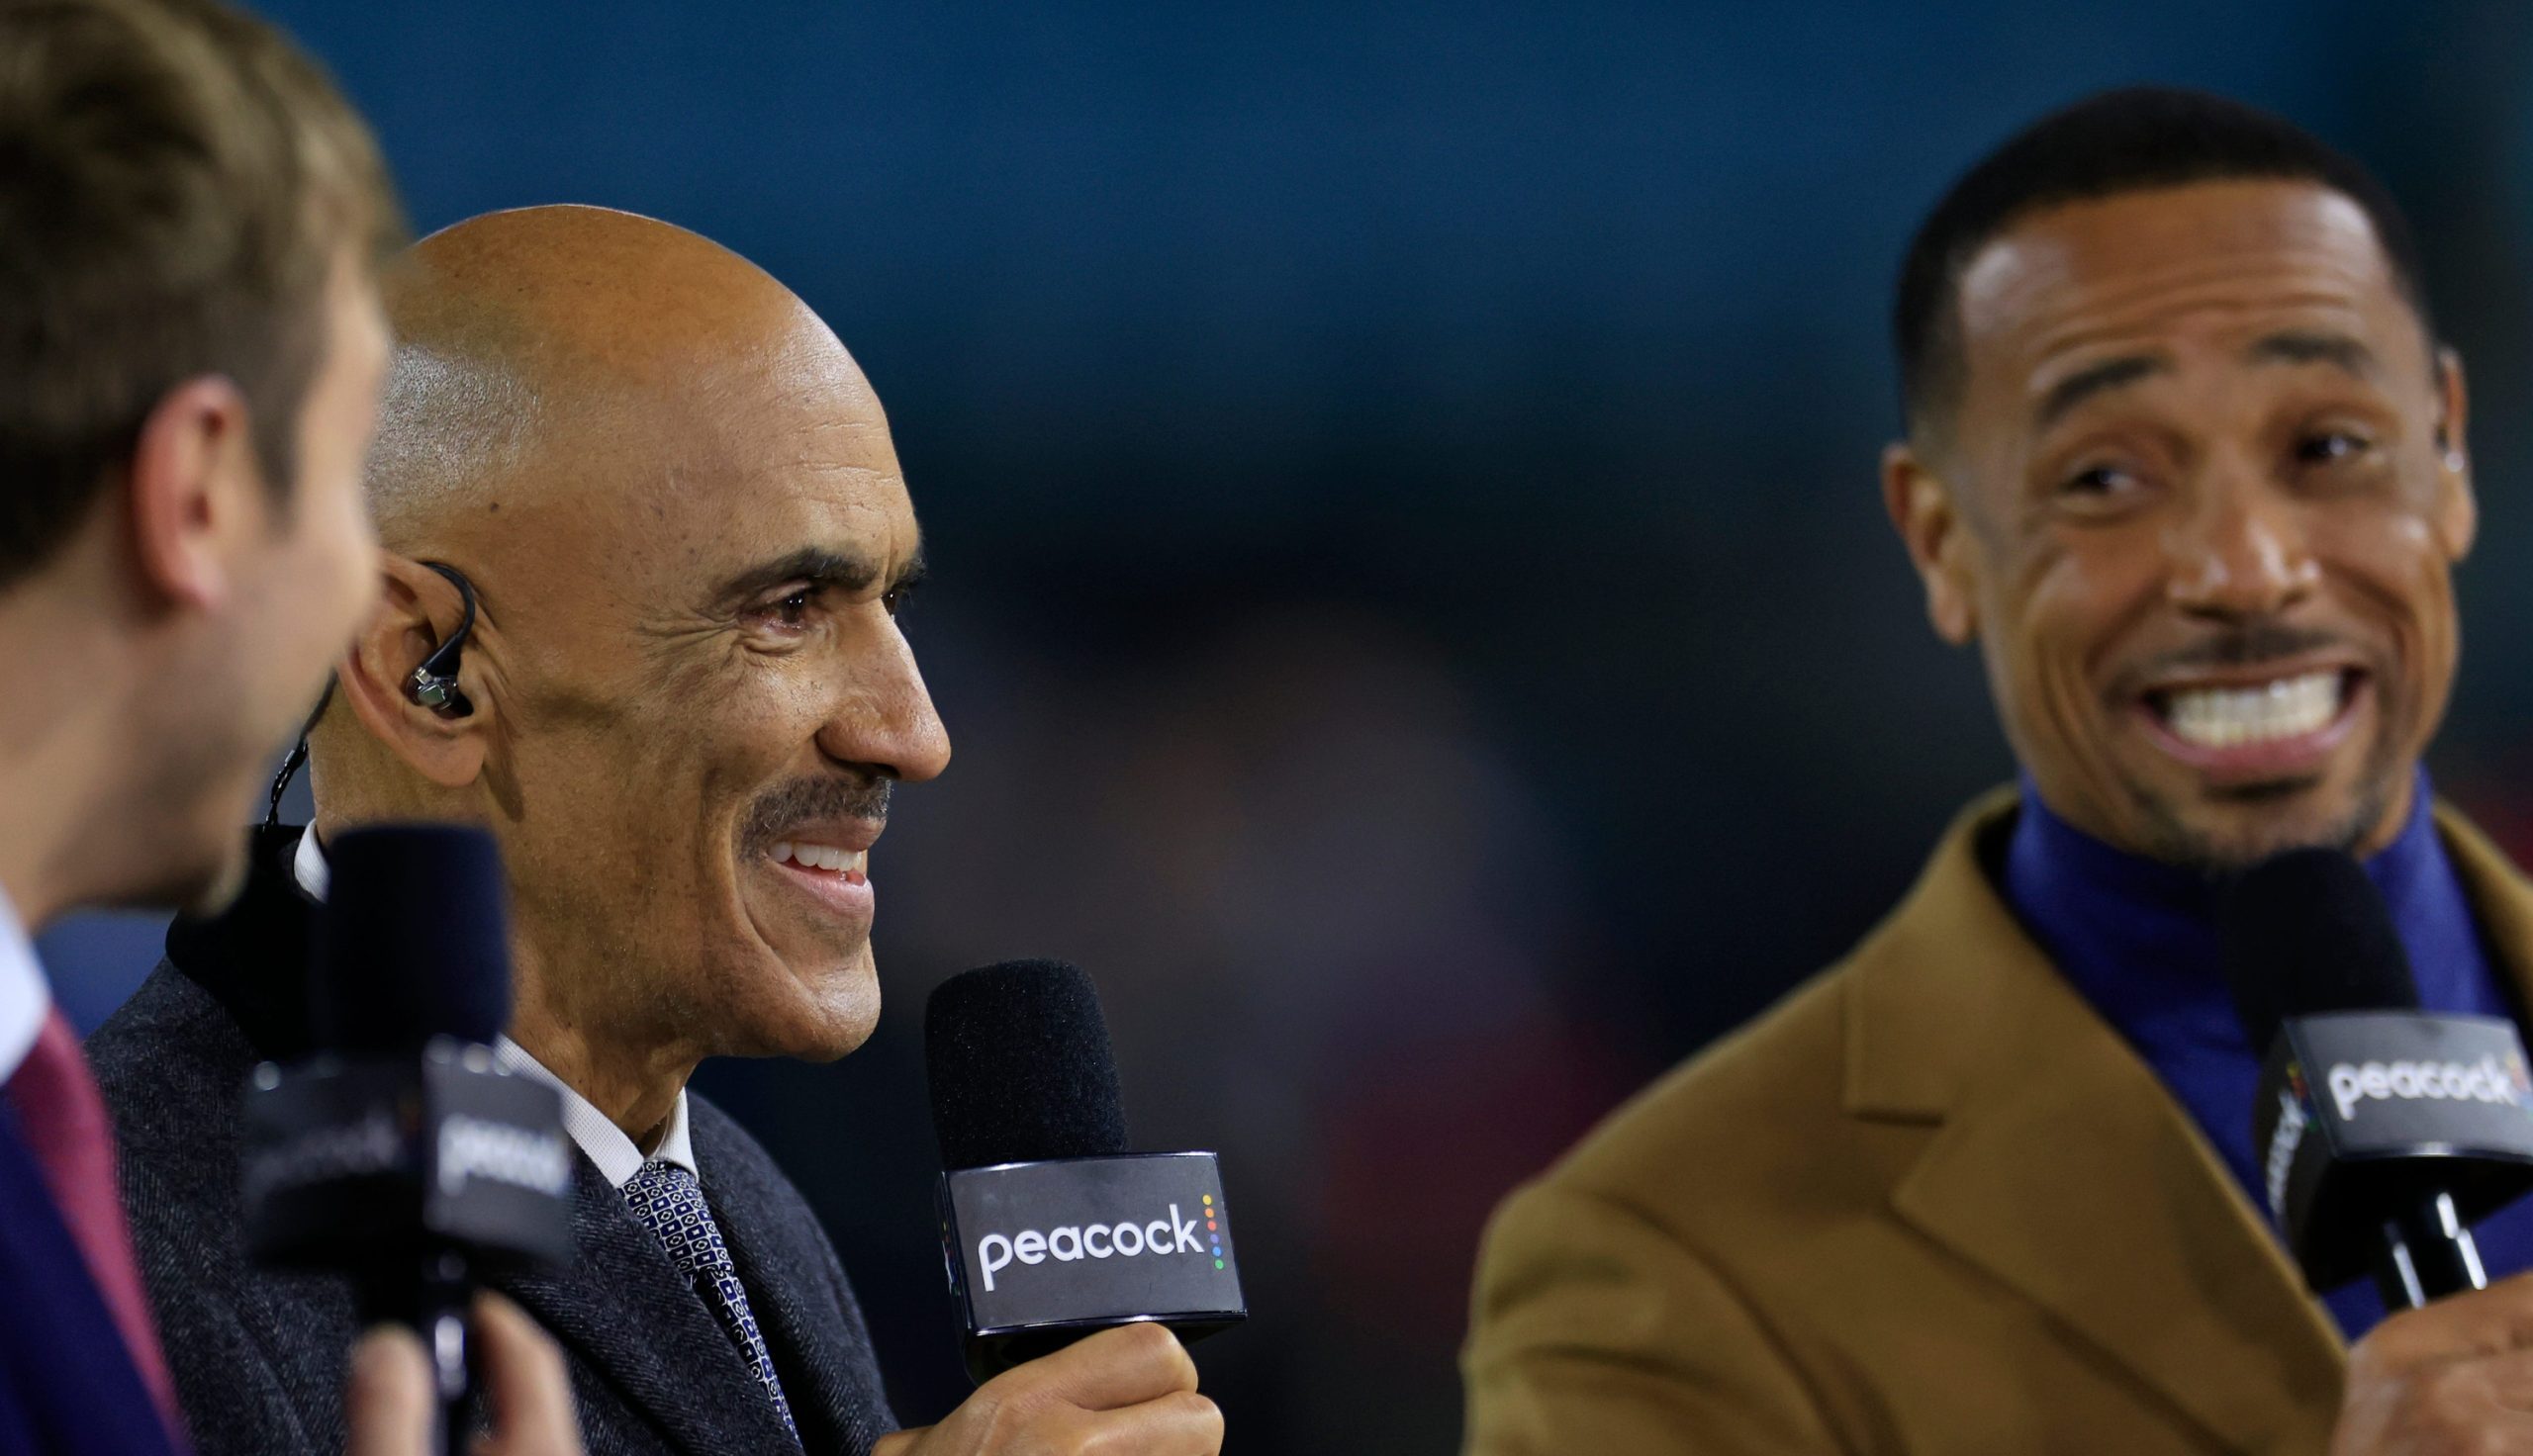 Commentators, from left, Jac Collinsworth, Tony Dungy and Rodney Harrison talk on-air for NBC/Peacock Sunday Night Football after the game of a regular season NFL football matchup Sunday, Dec. 17, 2023 at EverBank Stadium in Jacksonville, Fla. The Baltimore Ravens defeated the Jacksonville Jaguars 23-7.